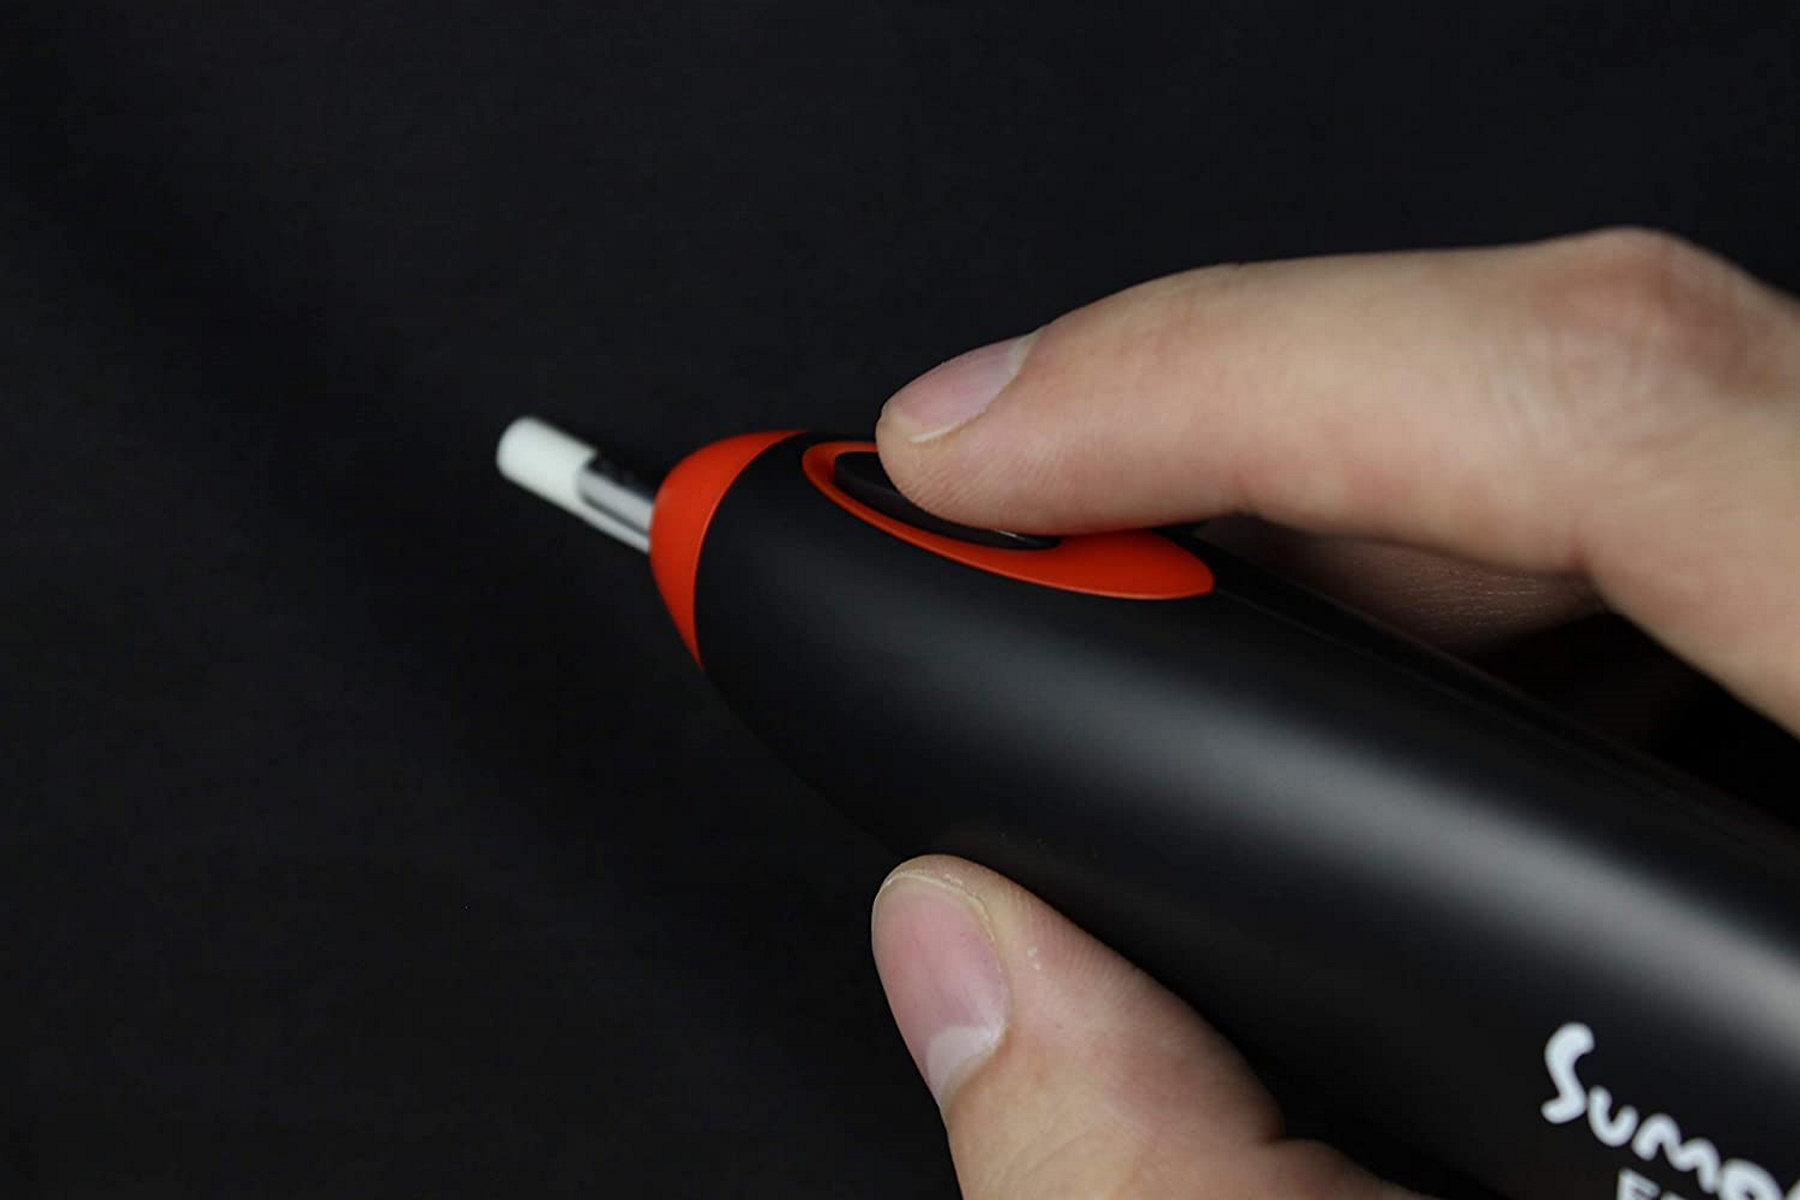 Electric eraser buyer’s guide: Uses, best products, and more